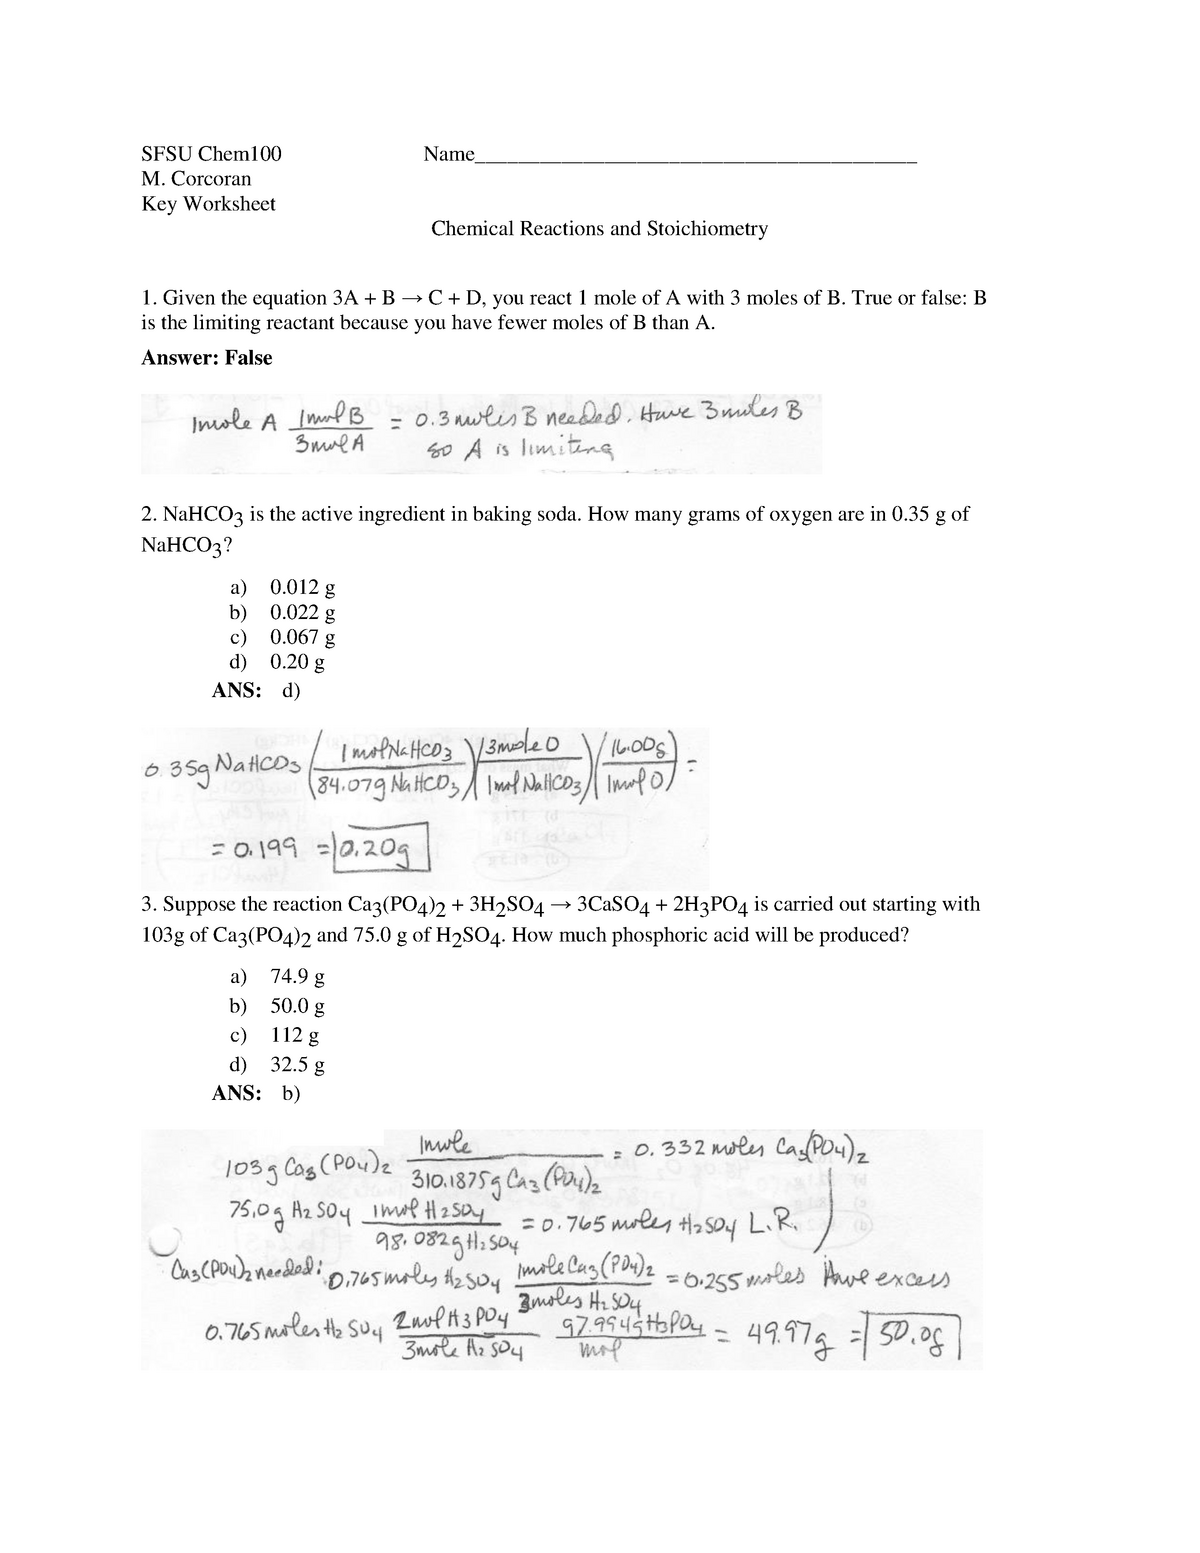 Key Worksheet - Chemical Reactions And Stoichiometry - With Intended For Stoichiometry Worksheet Answer Key